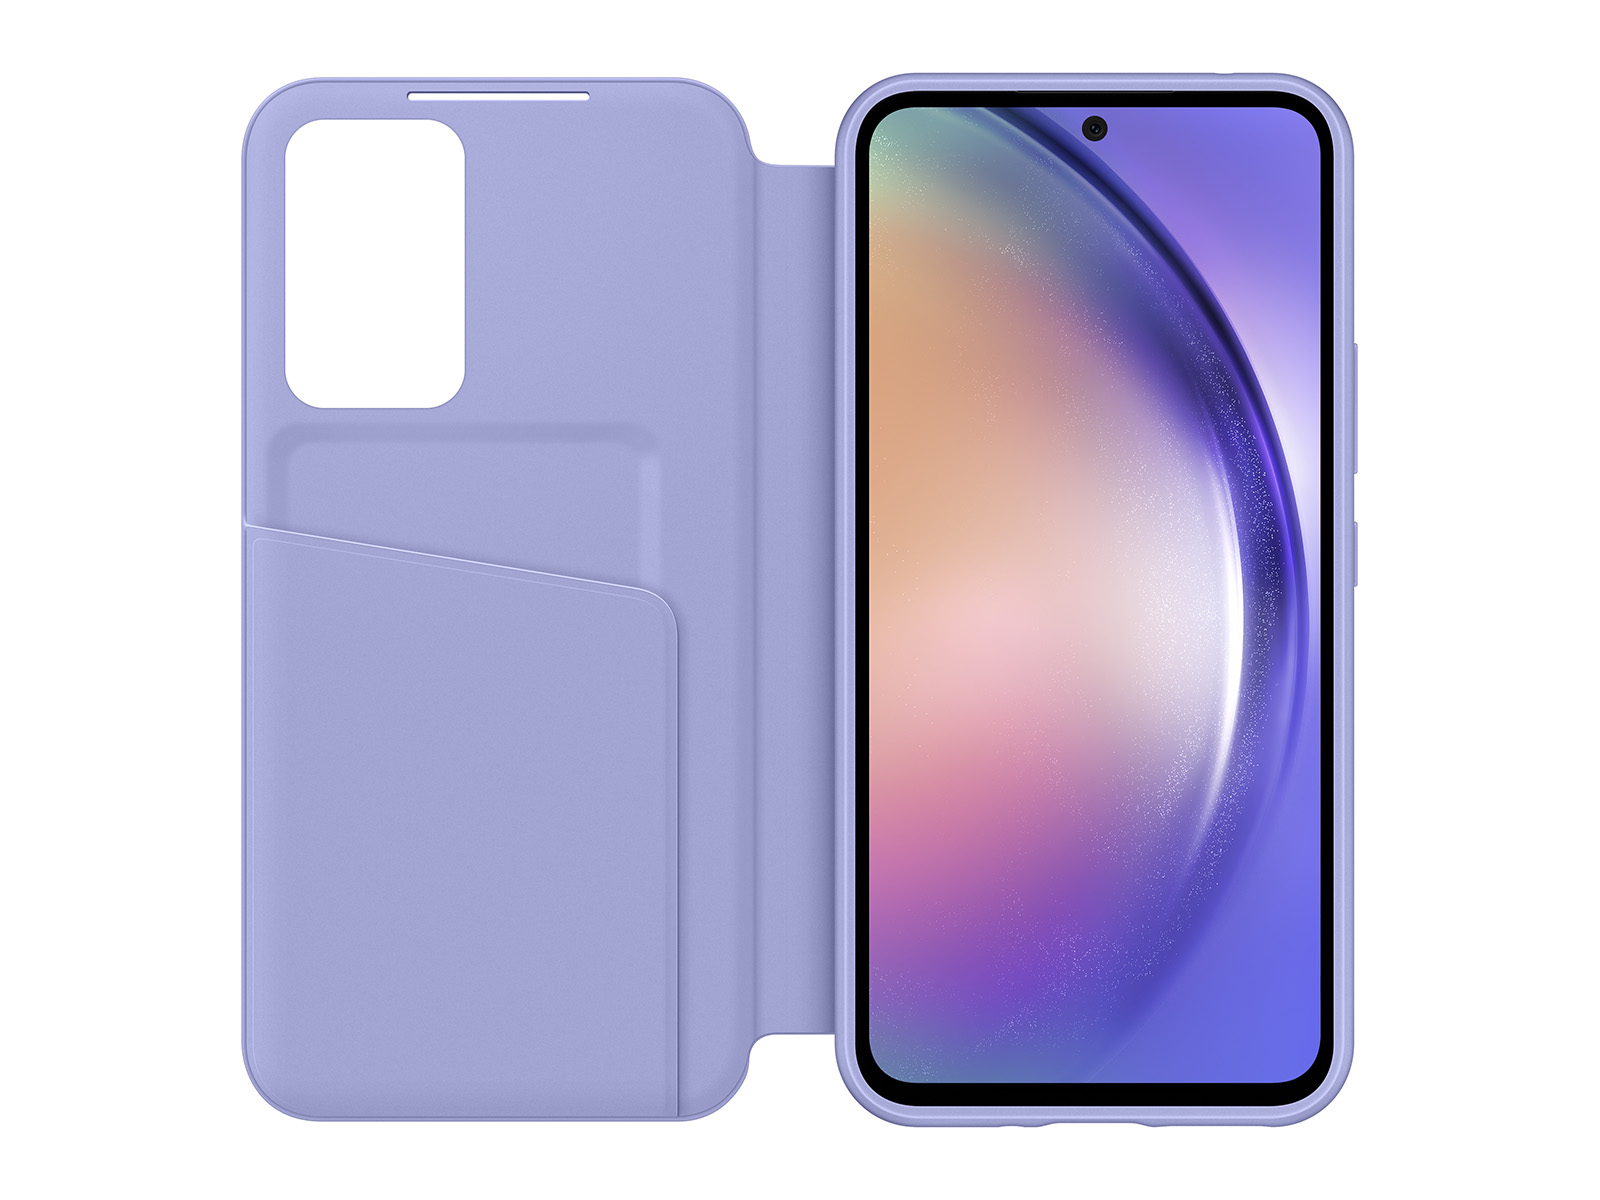  SAMSUNG Galaxy A54 5G S-View Wallet Phone Case, Protective Cover  w/Card Holder Slot, Finger Tap Display Window, US Version, EF-ZA546CVEGUS,  Blueberry : Cell Phones & Accessories